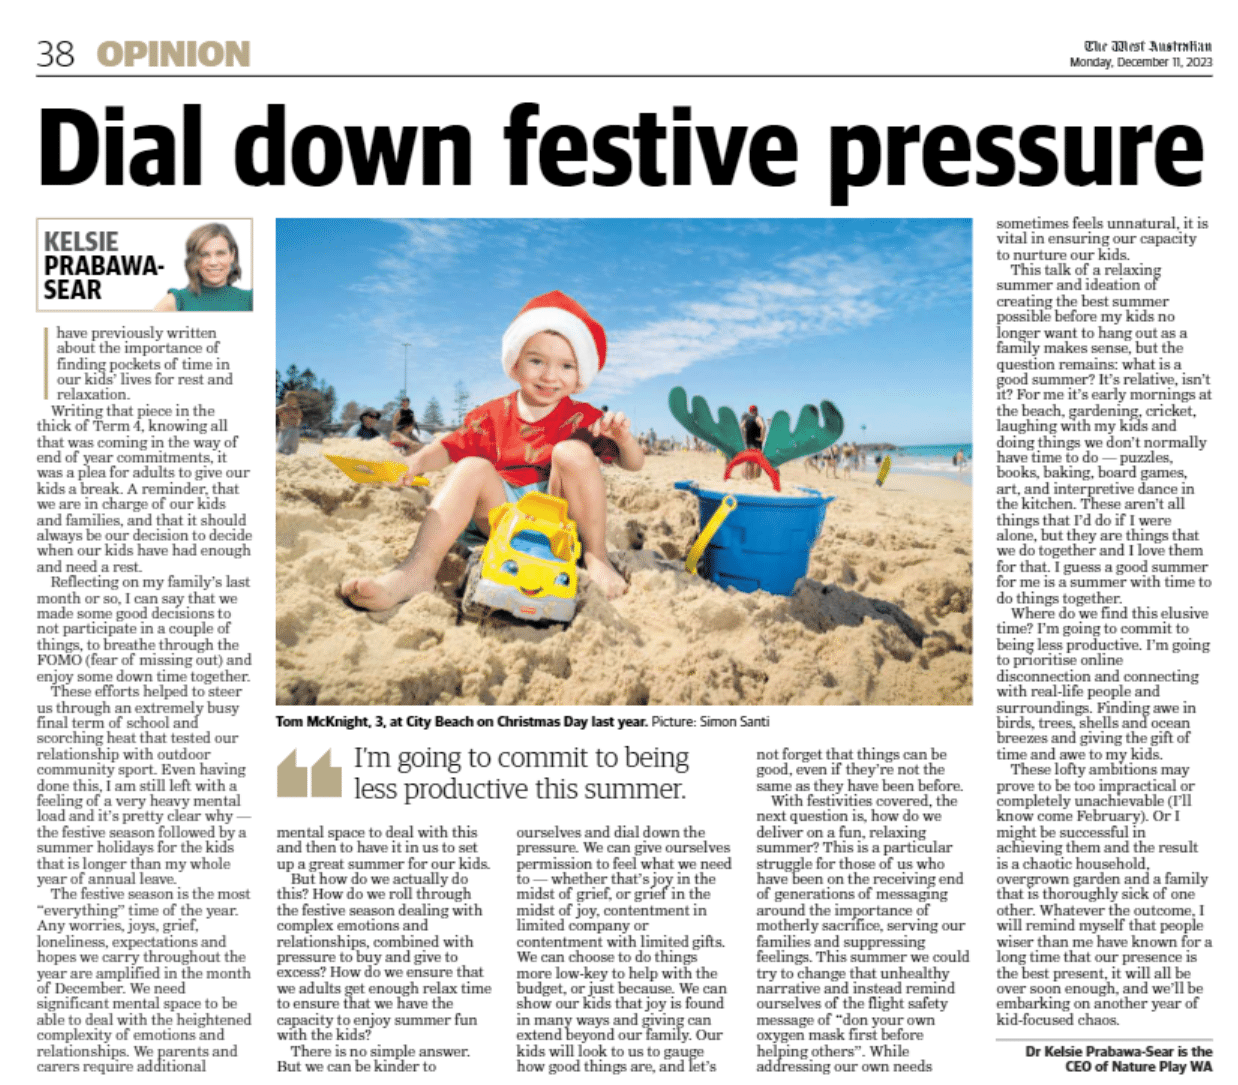 A screenshot of Nature Play WA CEO Dr Kelsie Prabawa-Sear's article in The West Australian